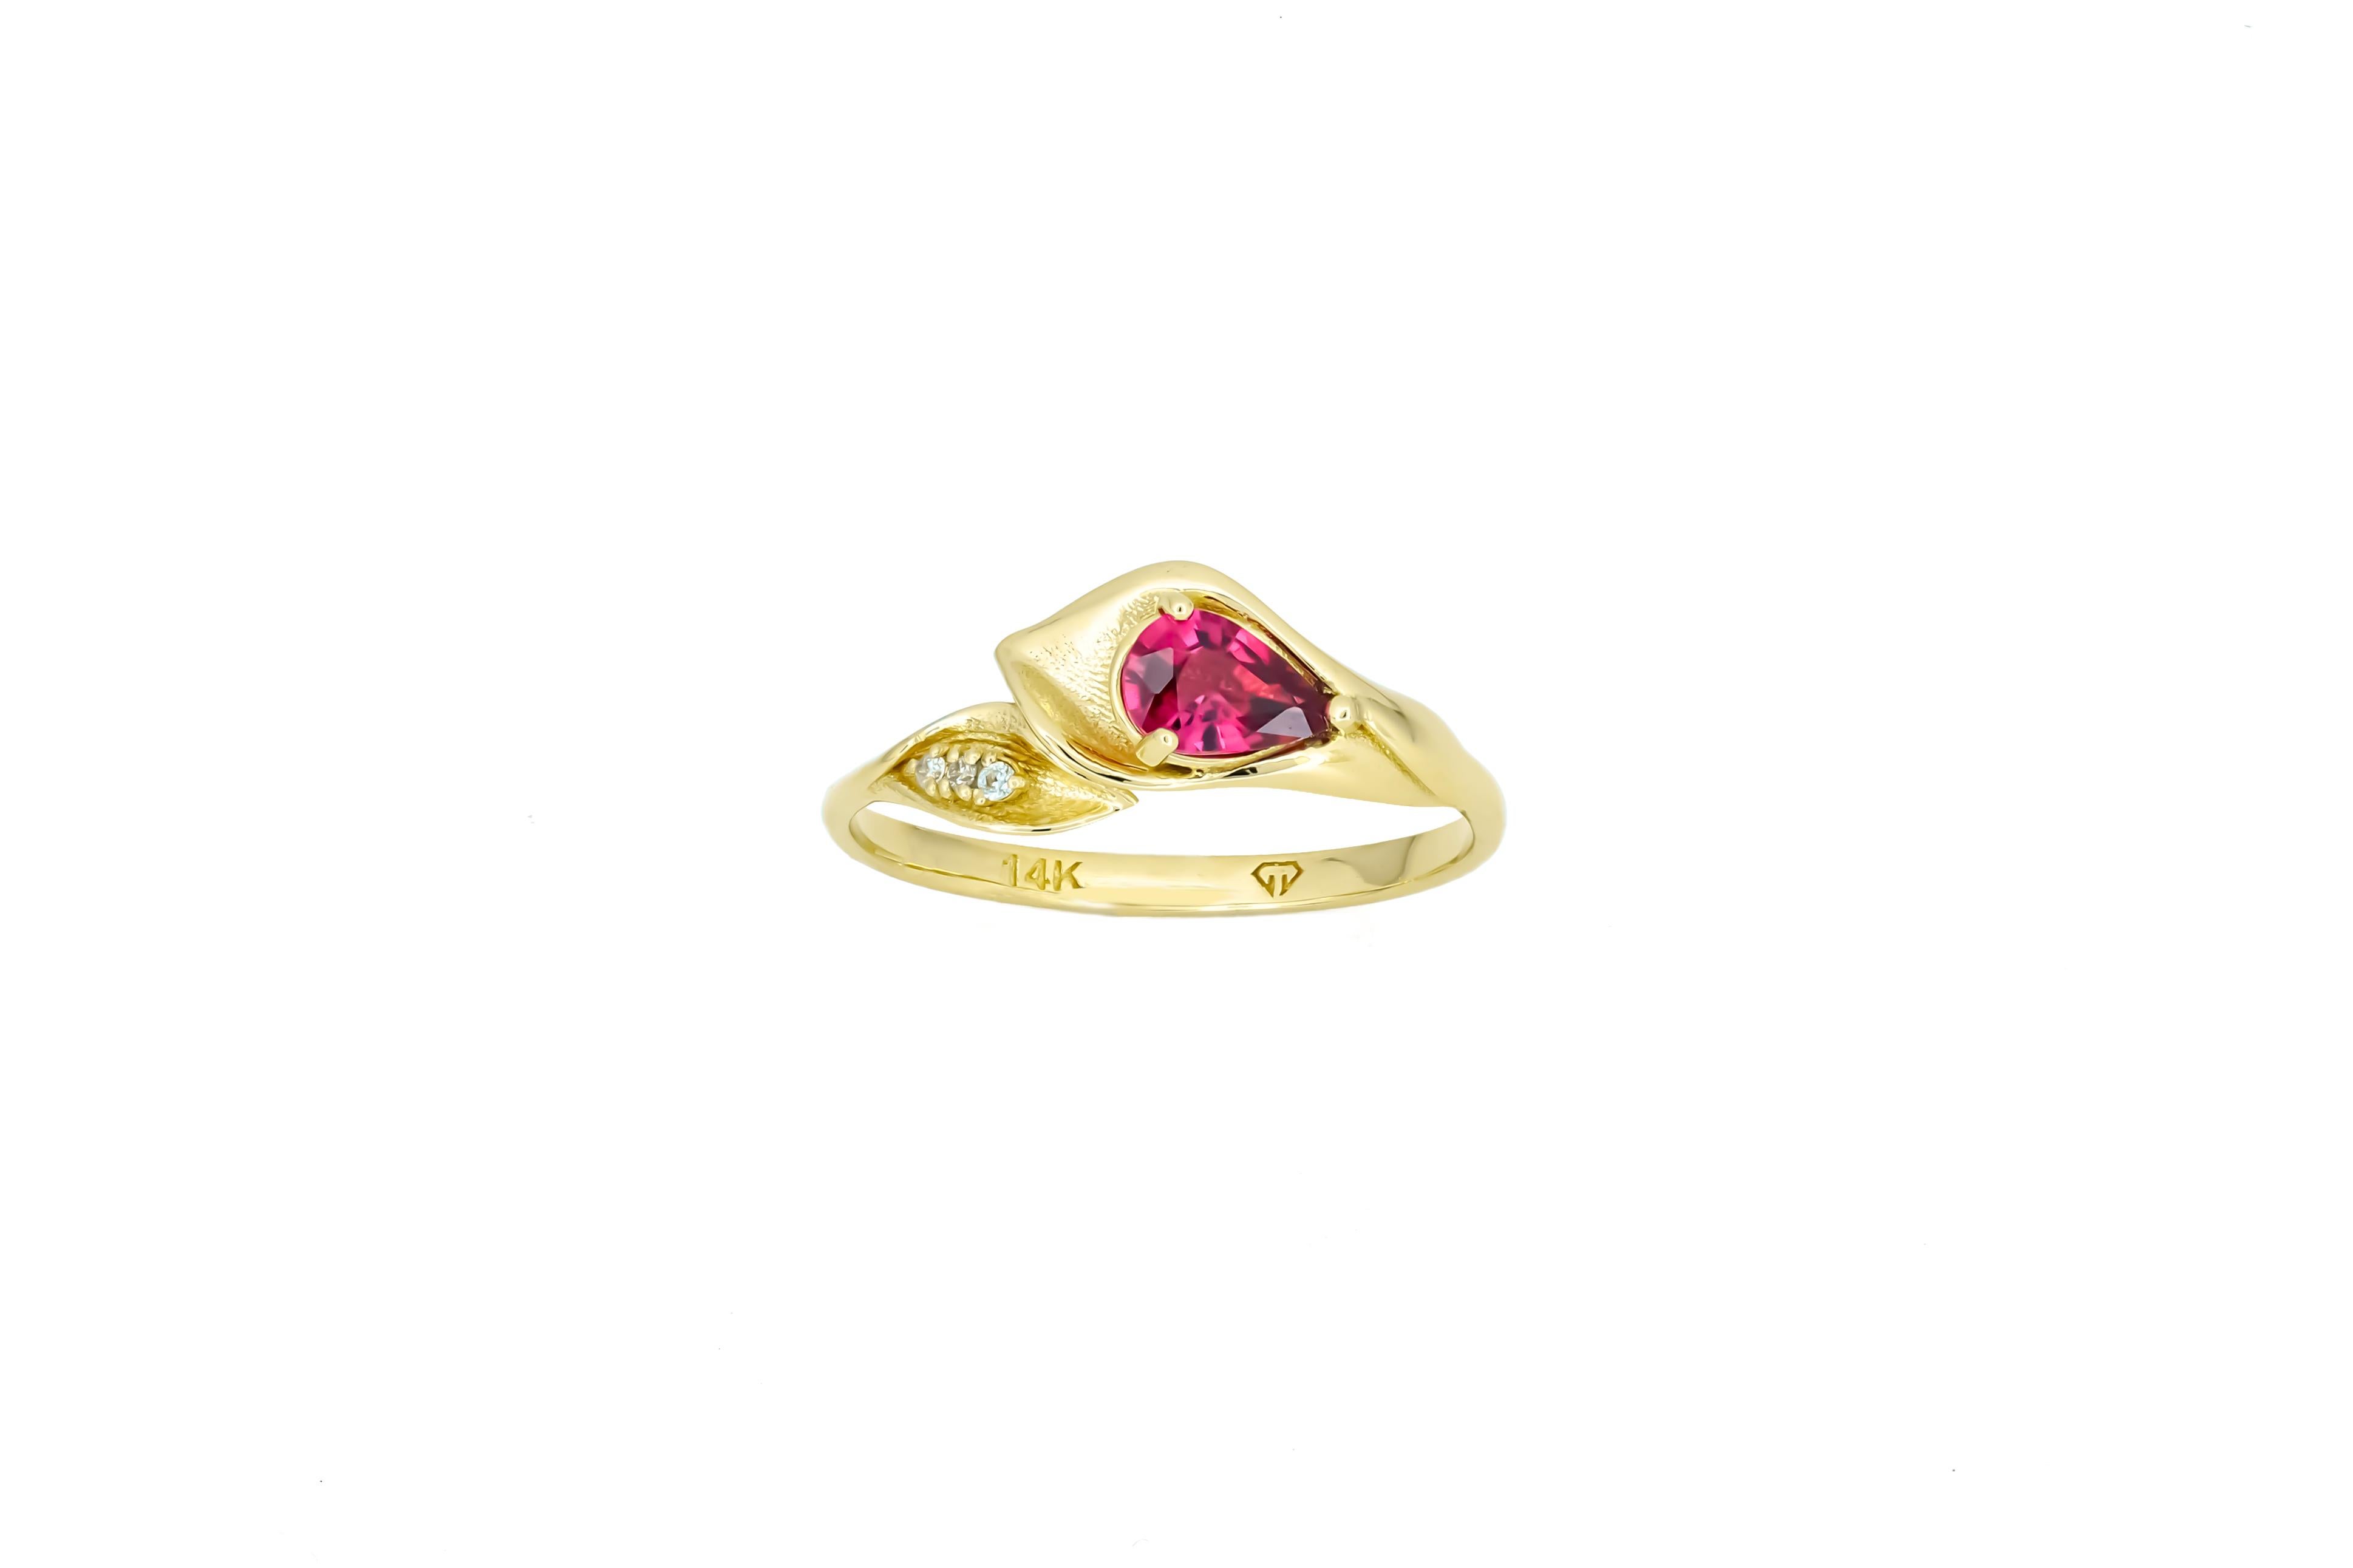 Lily Calla Gold Ring, 14 Karat Gold Ring with Garnet and Diamonds For Sale 4